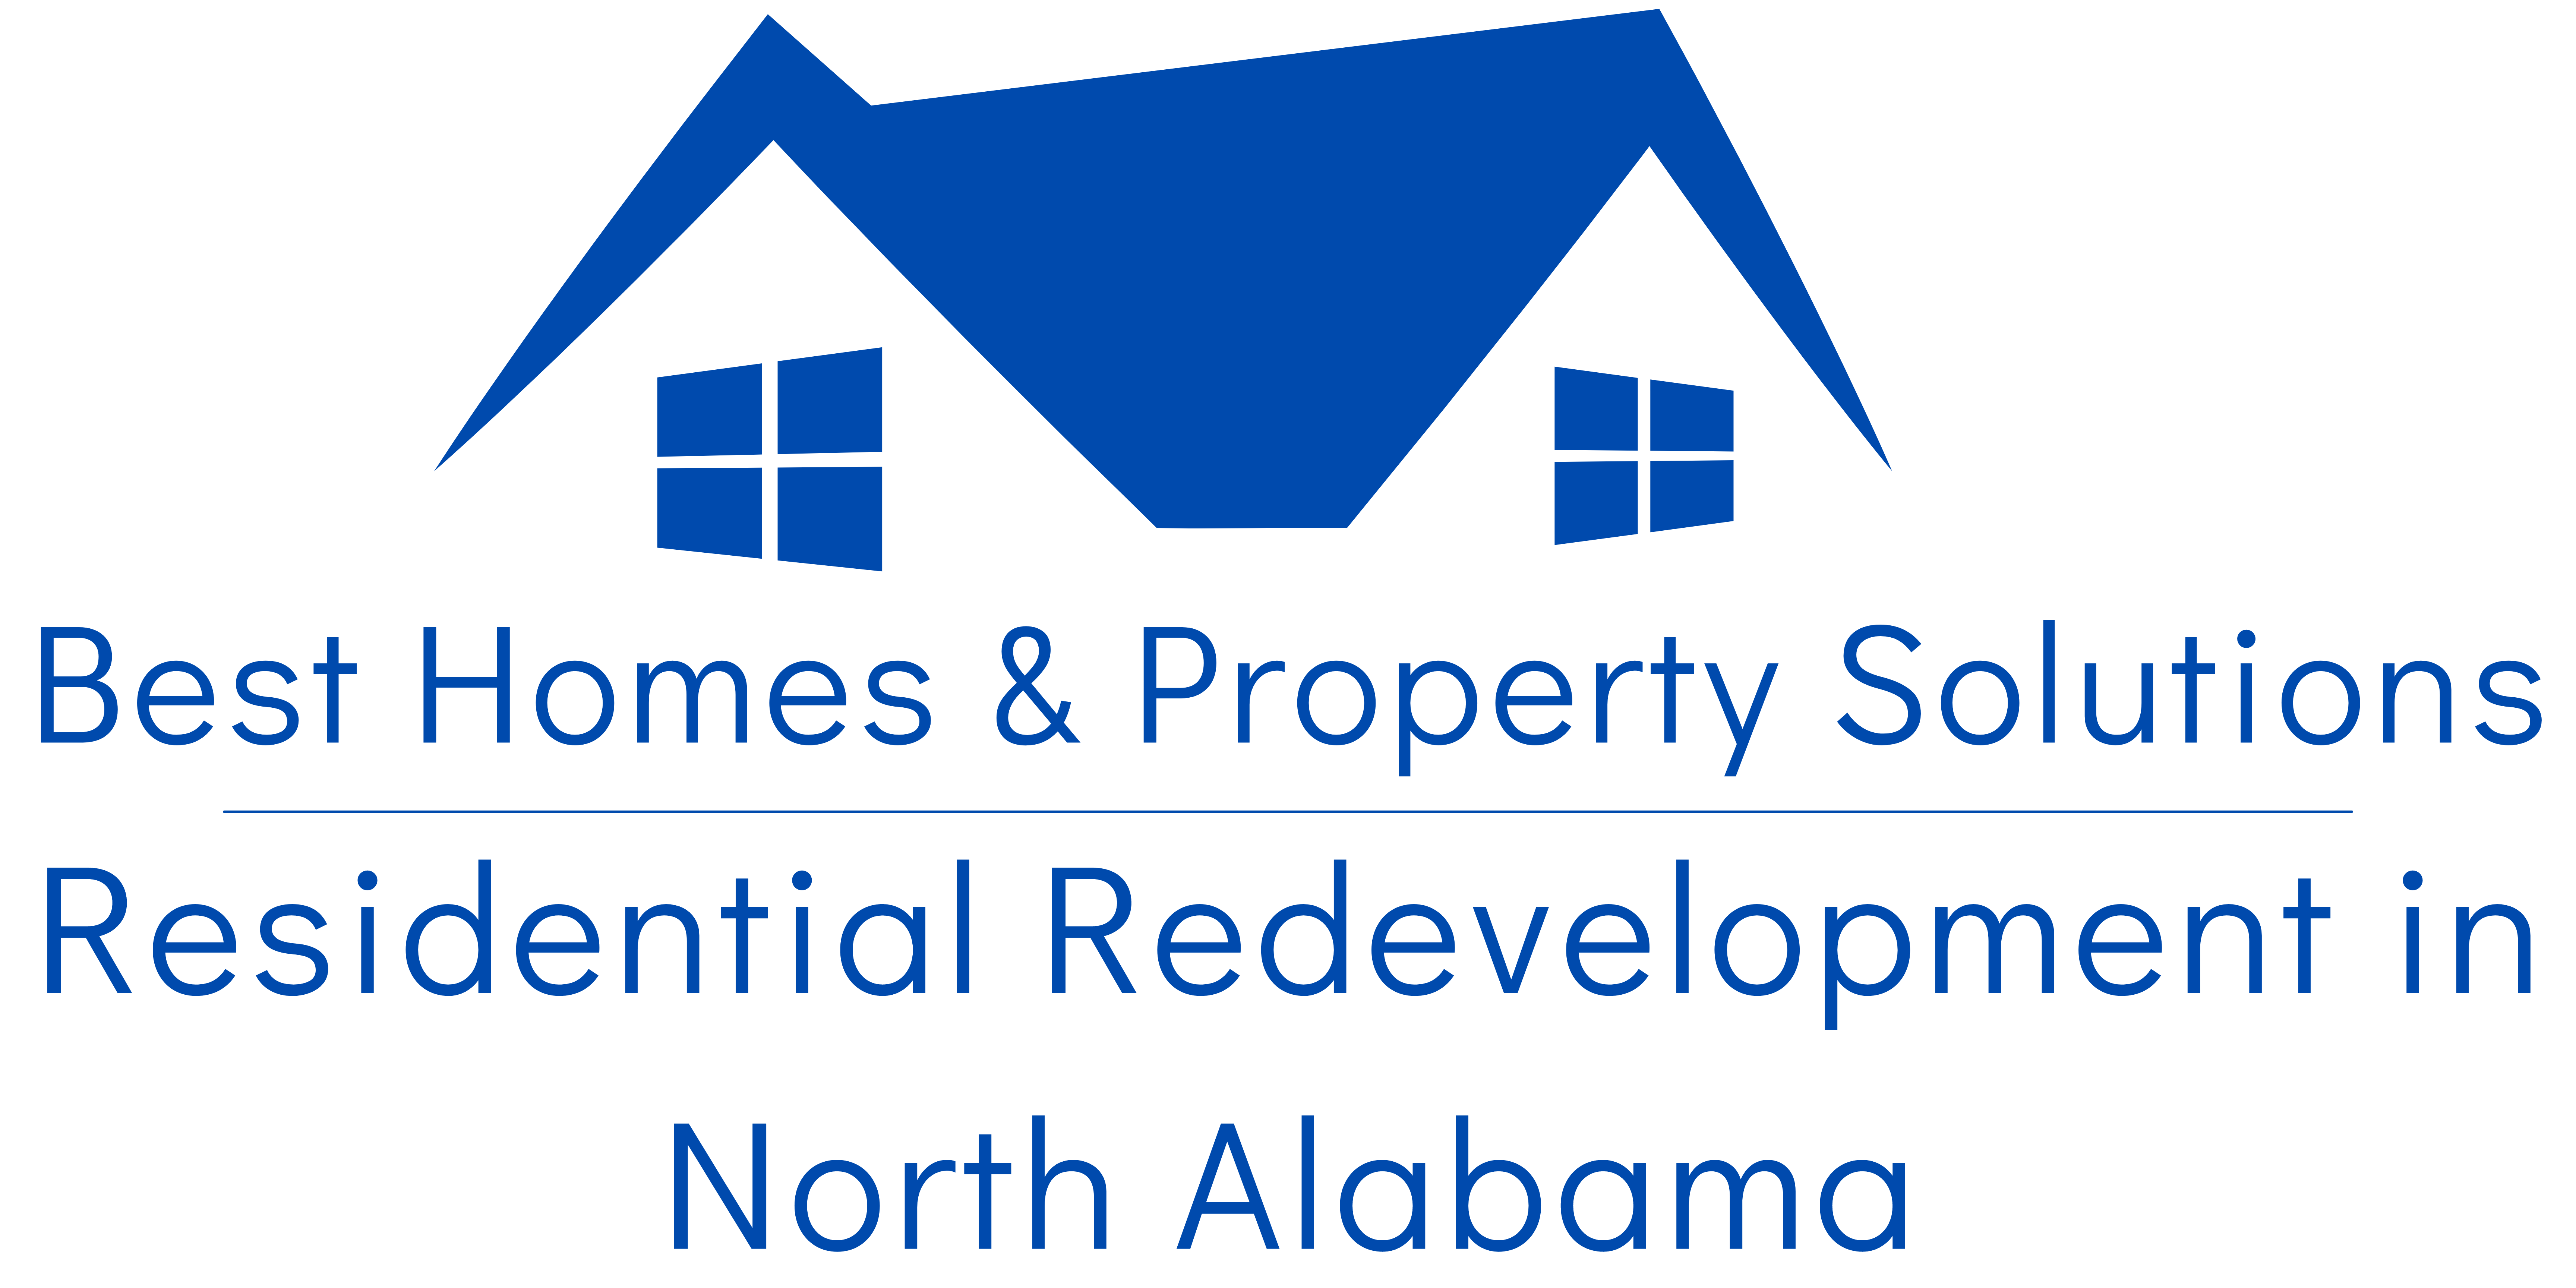 Best Homes – We Buy Houses for CASH and Can Close Quickly! Huntsville & Northern Alabama Areas